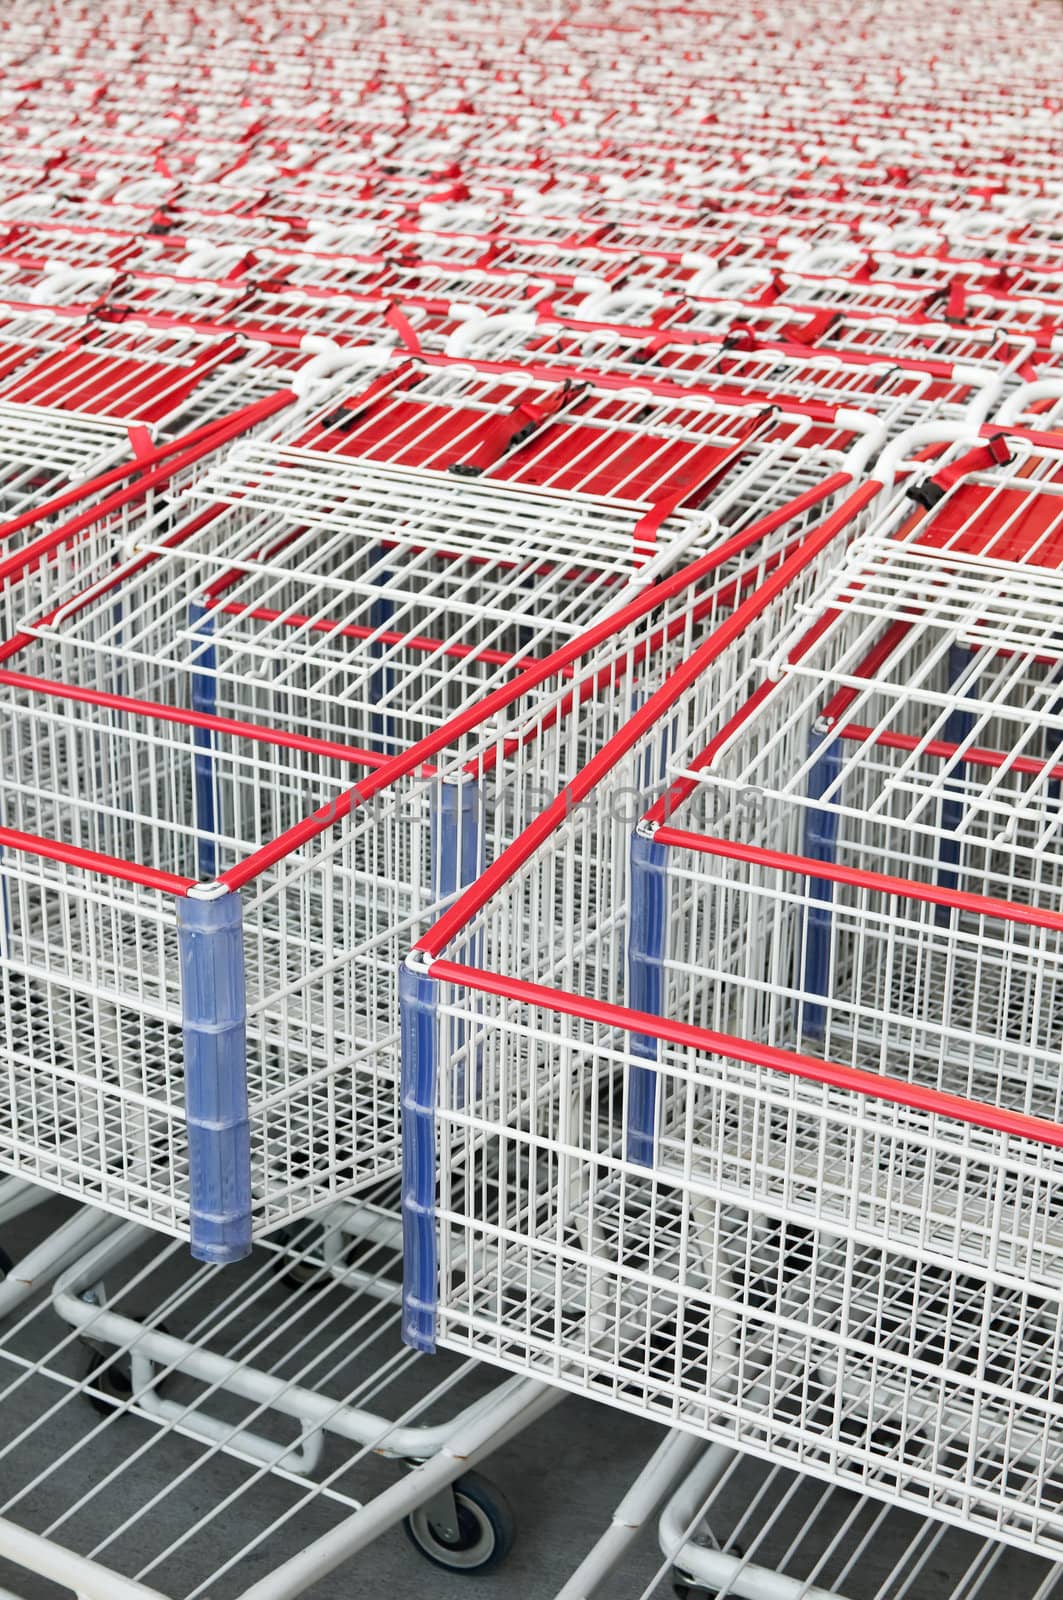 American shopping carts stacked together. by Shane9